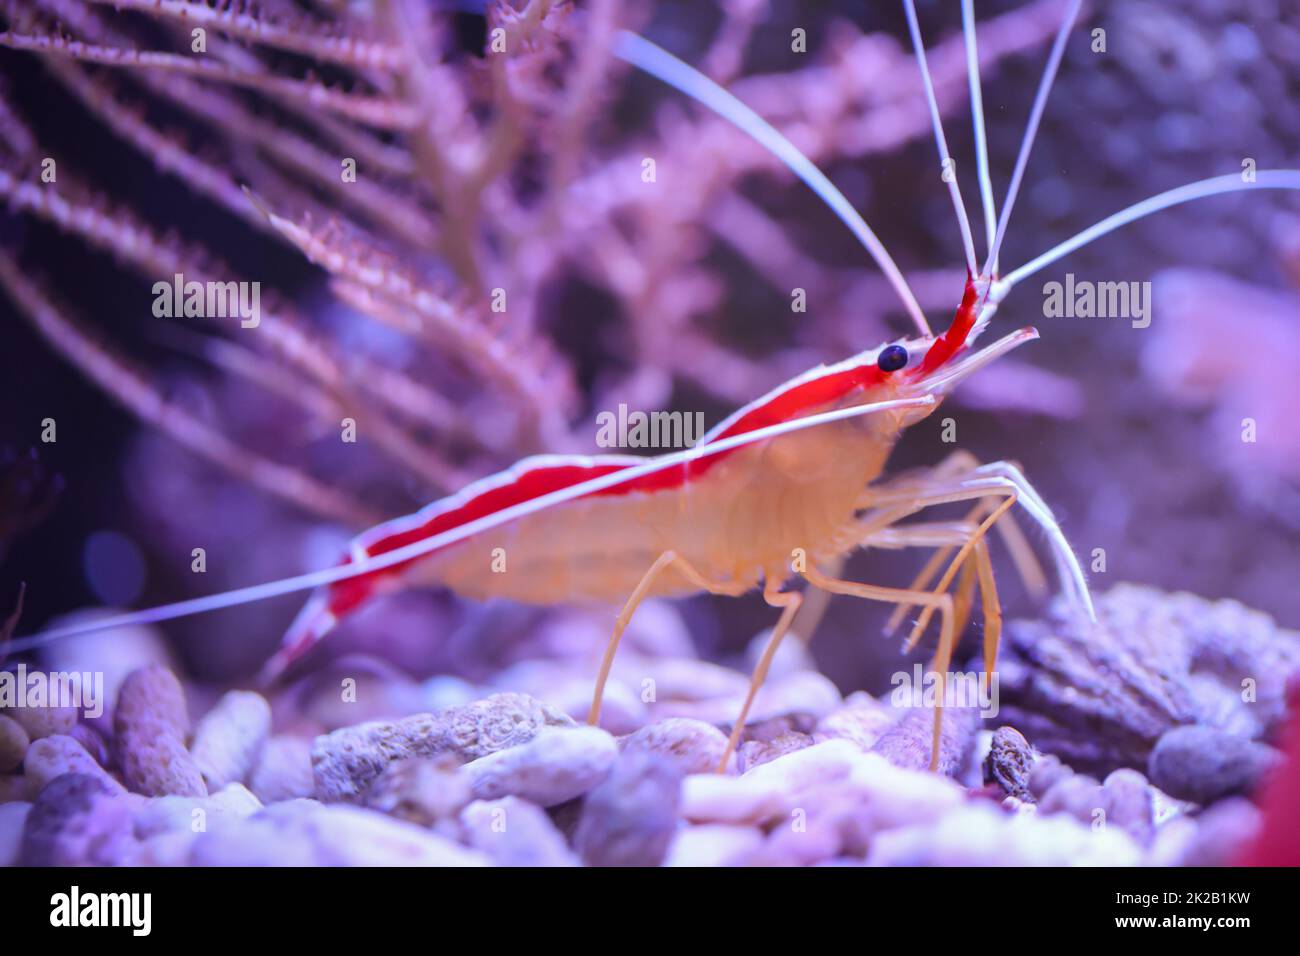 A white banded shrimp in a saltwater aquarium. Stock Photo